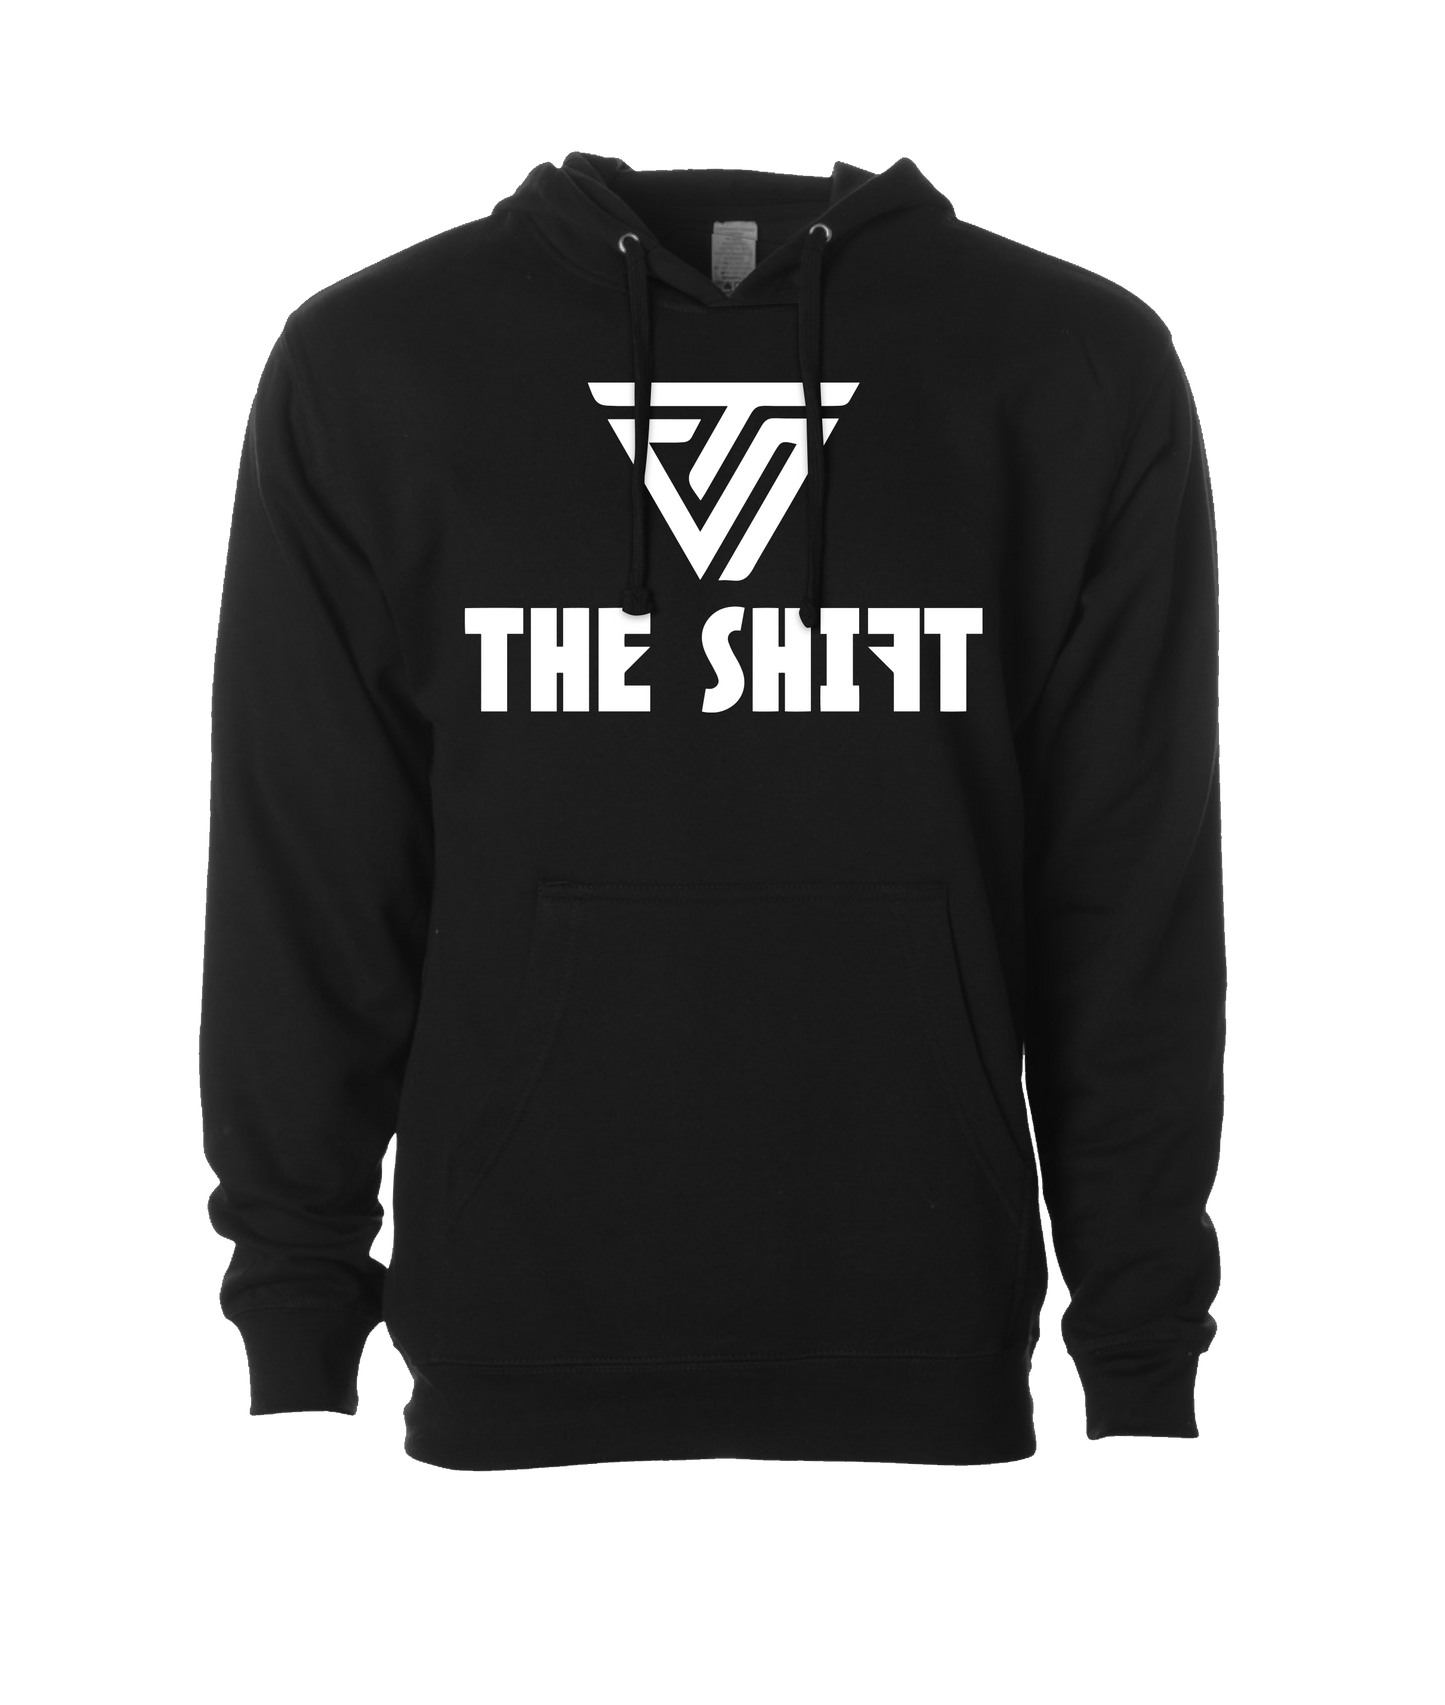 TheShift - Be The Shift - Black Hoodie